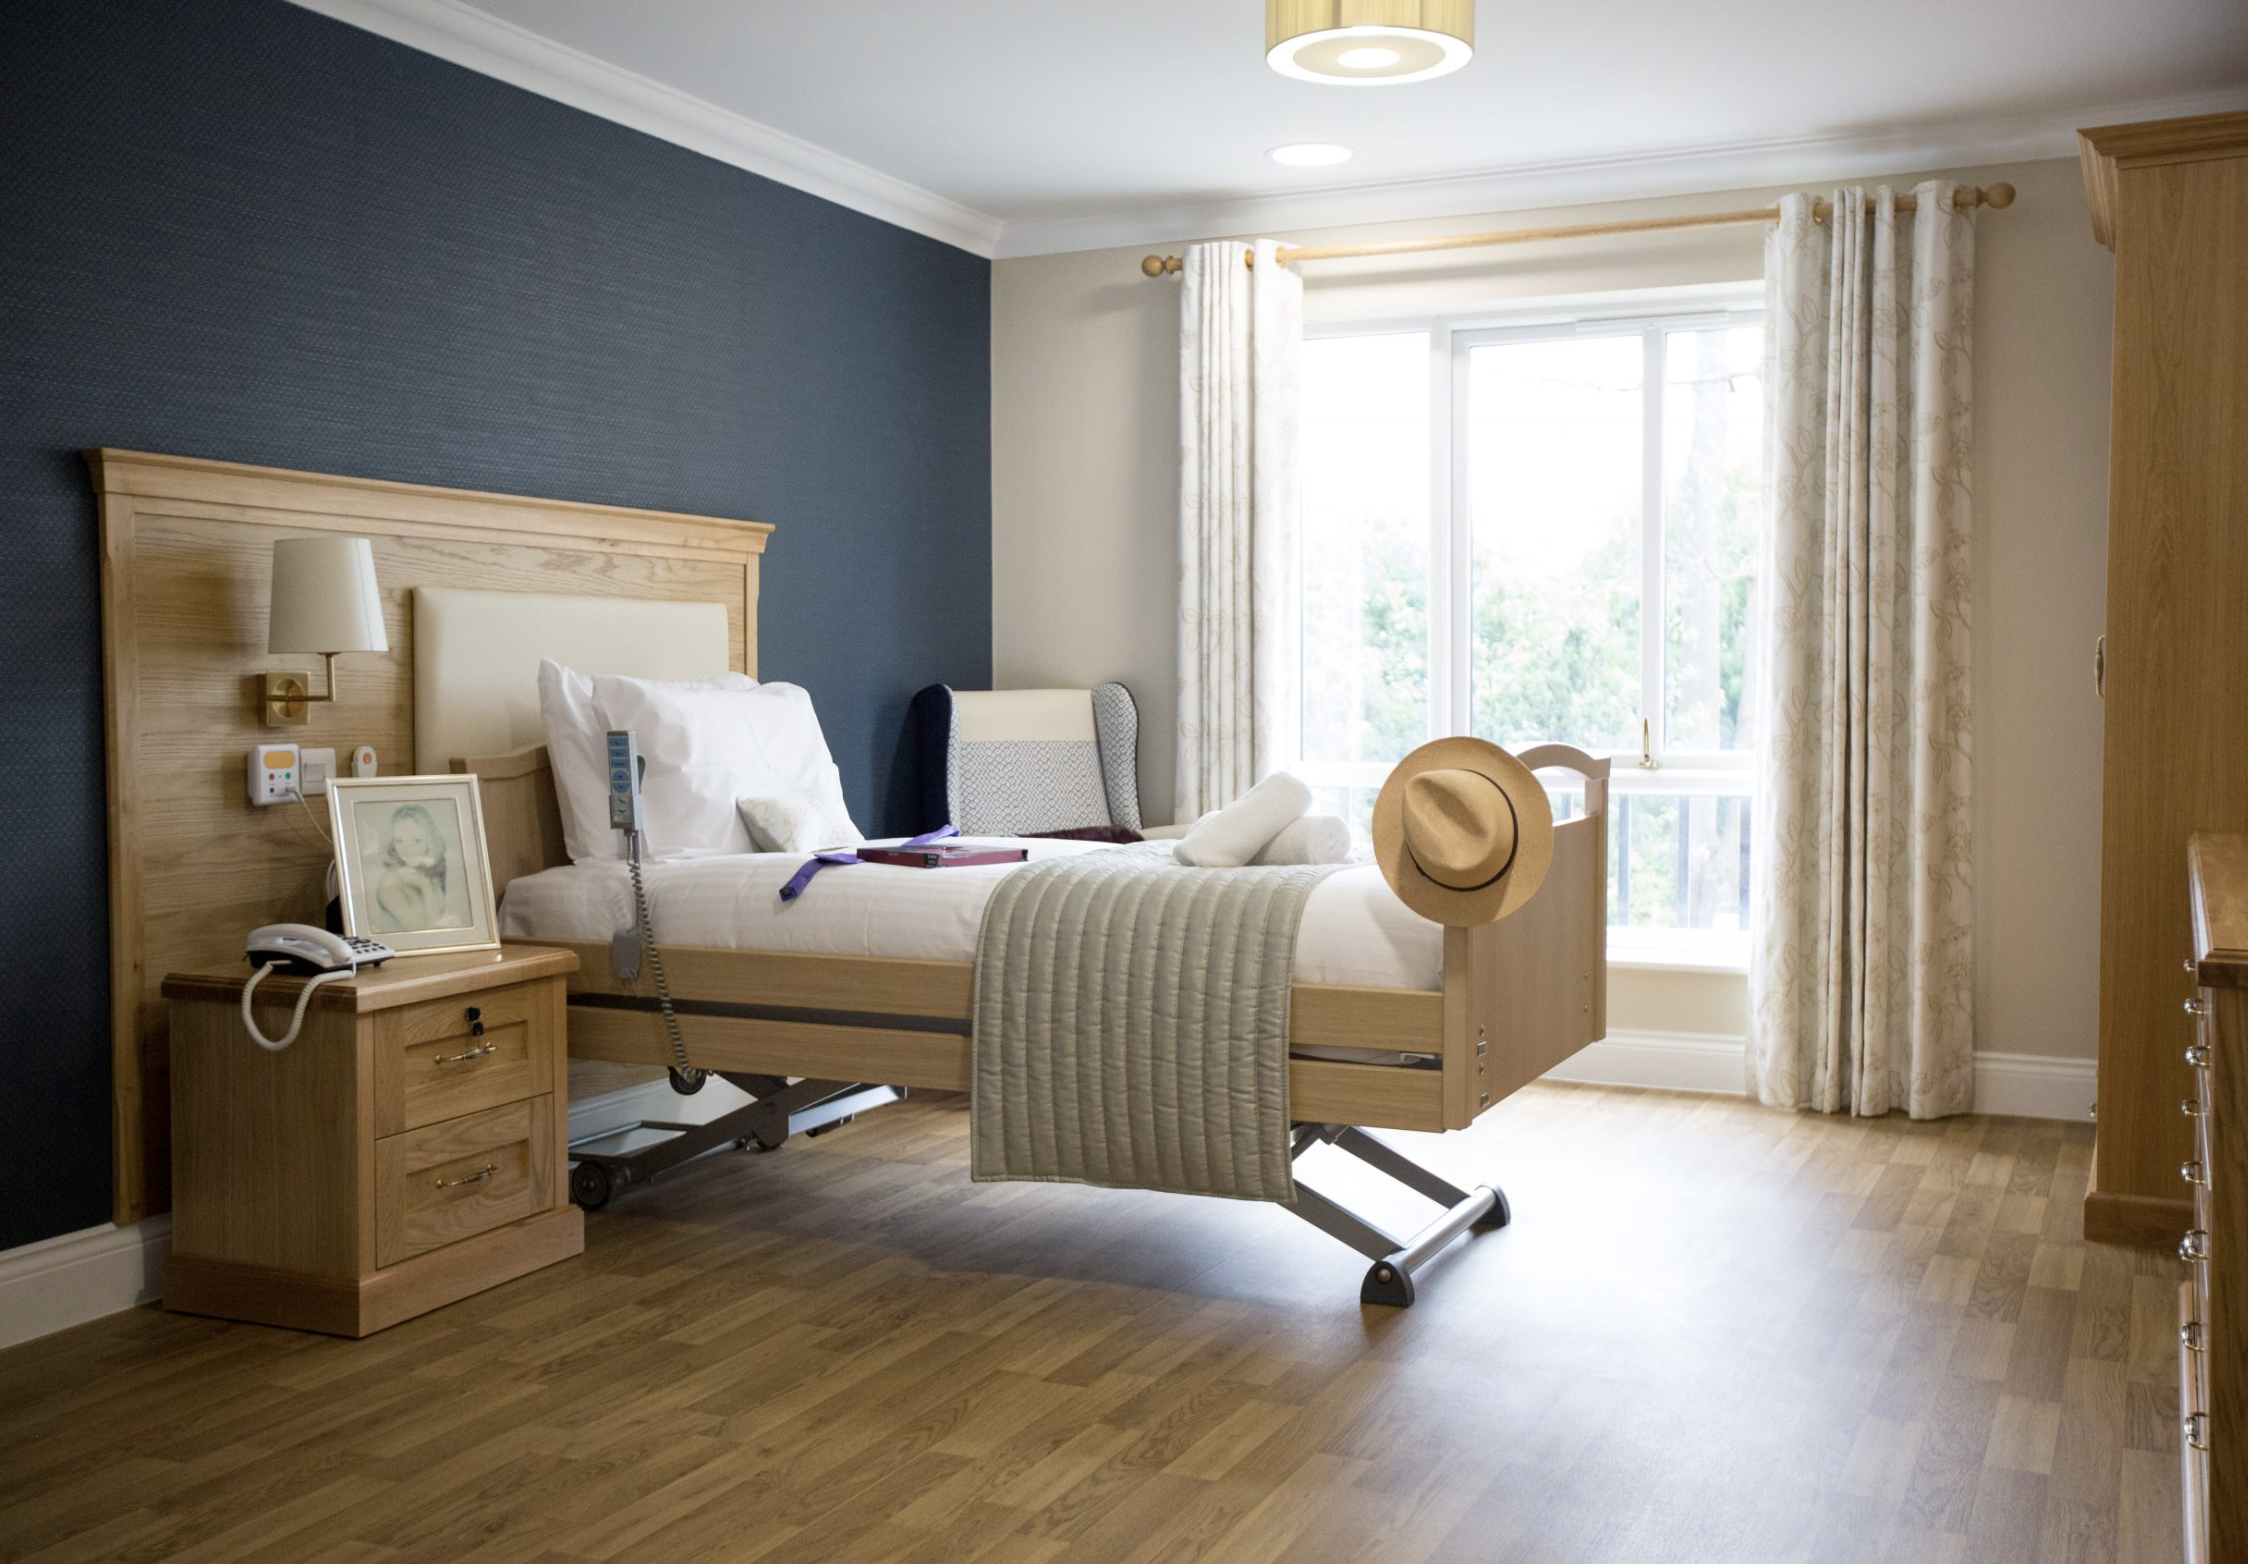 Bedroom of Cuffley Manor care home in Potters Bar, Hertfordshire